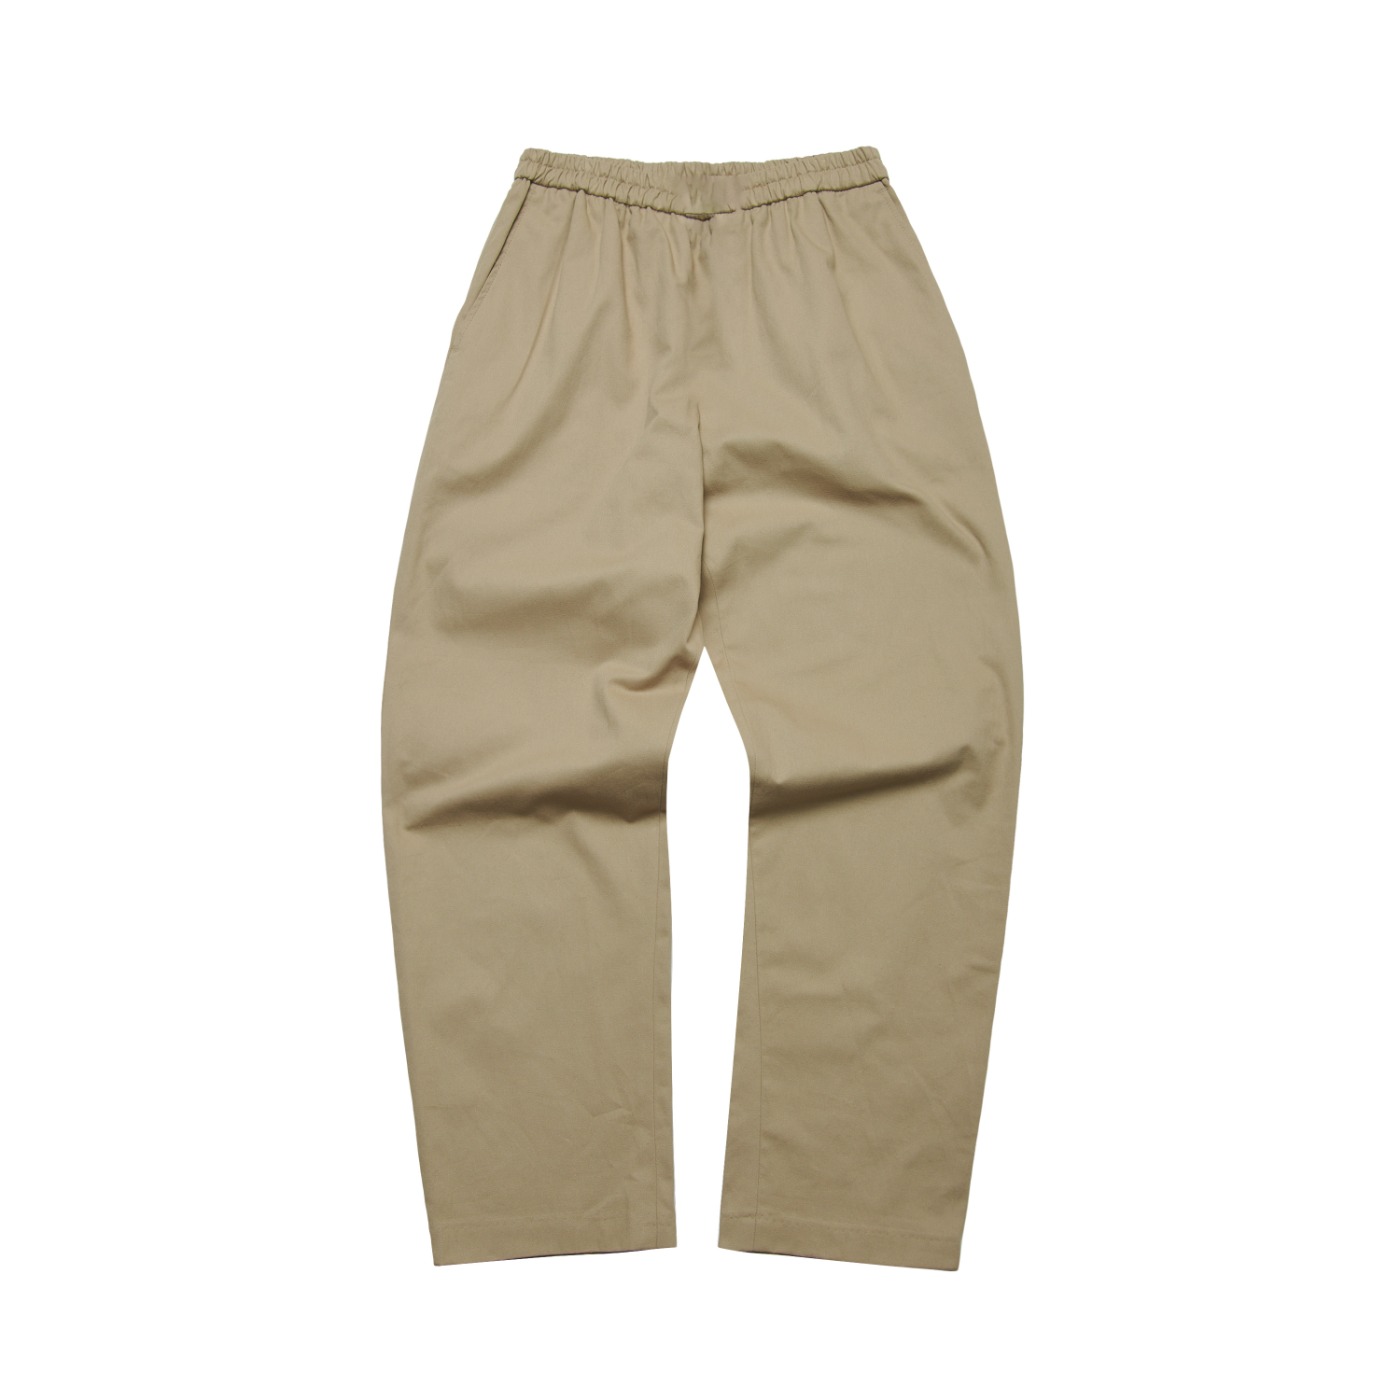 Daliy tapered cotton pants_beige